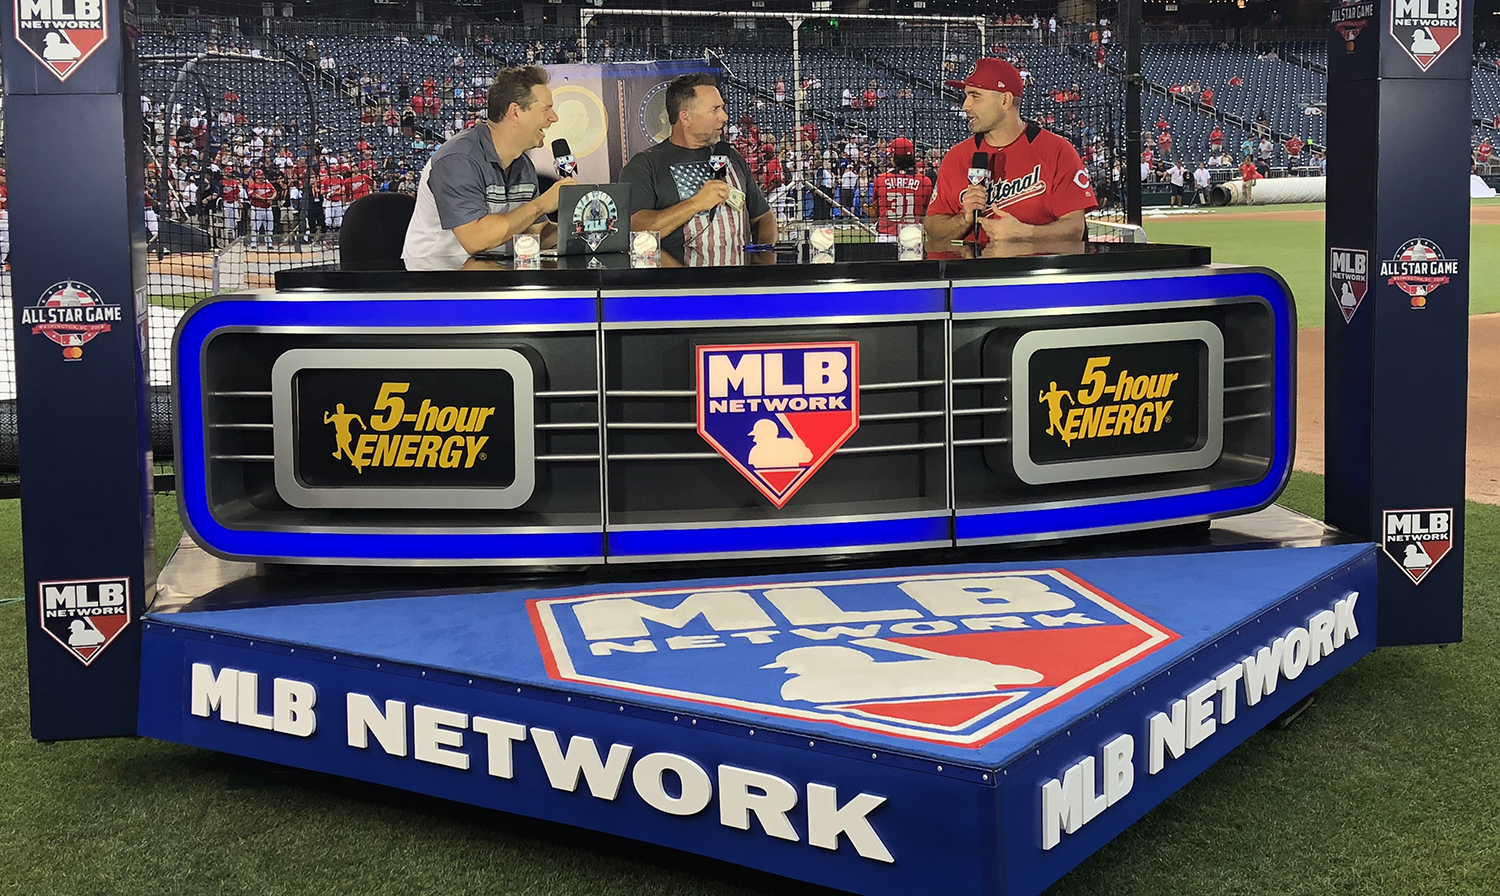 Live From MLB All-Star Boom in Digital Content Spurs Boost in MLB Network Ops